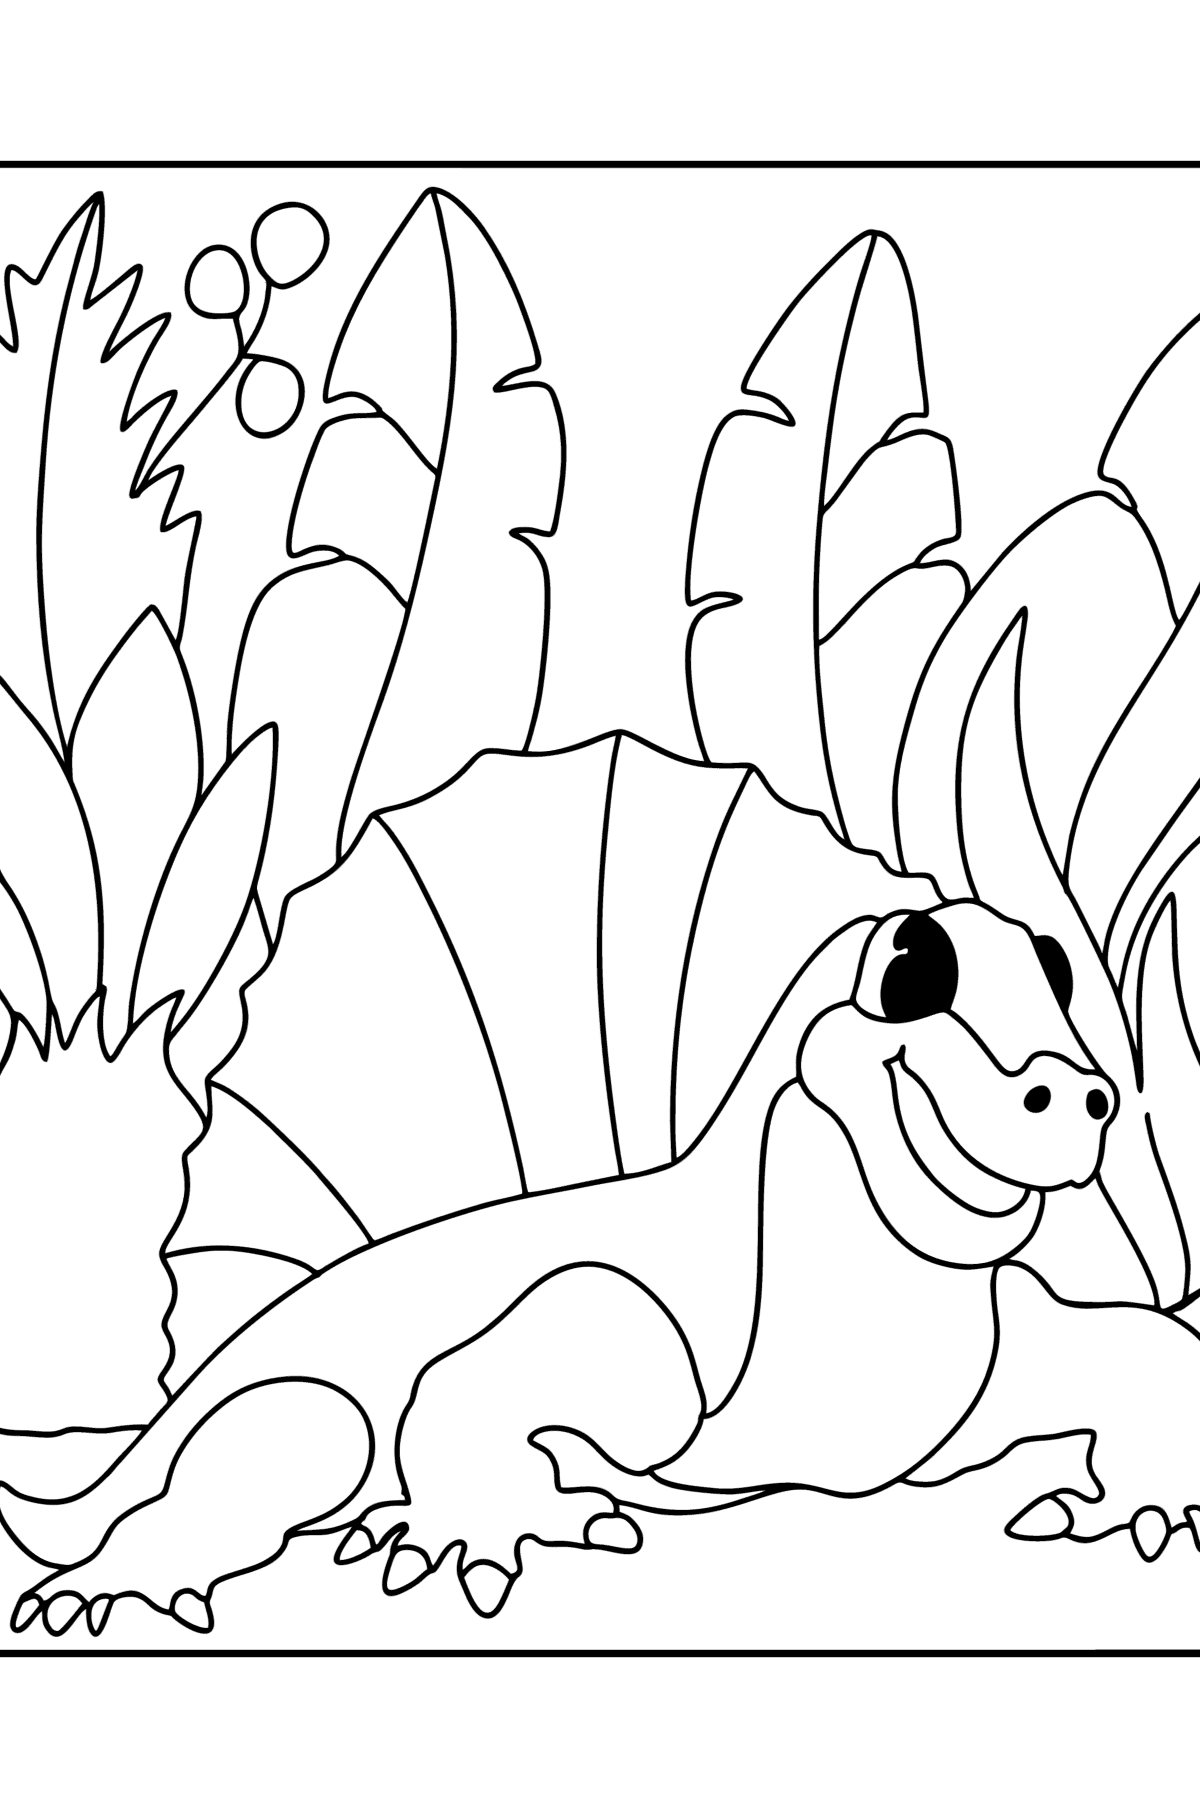 Dimetrodon coloring page - Coloring Pages for Kids